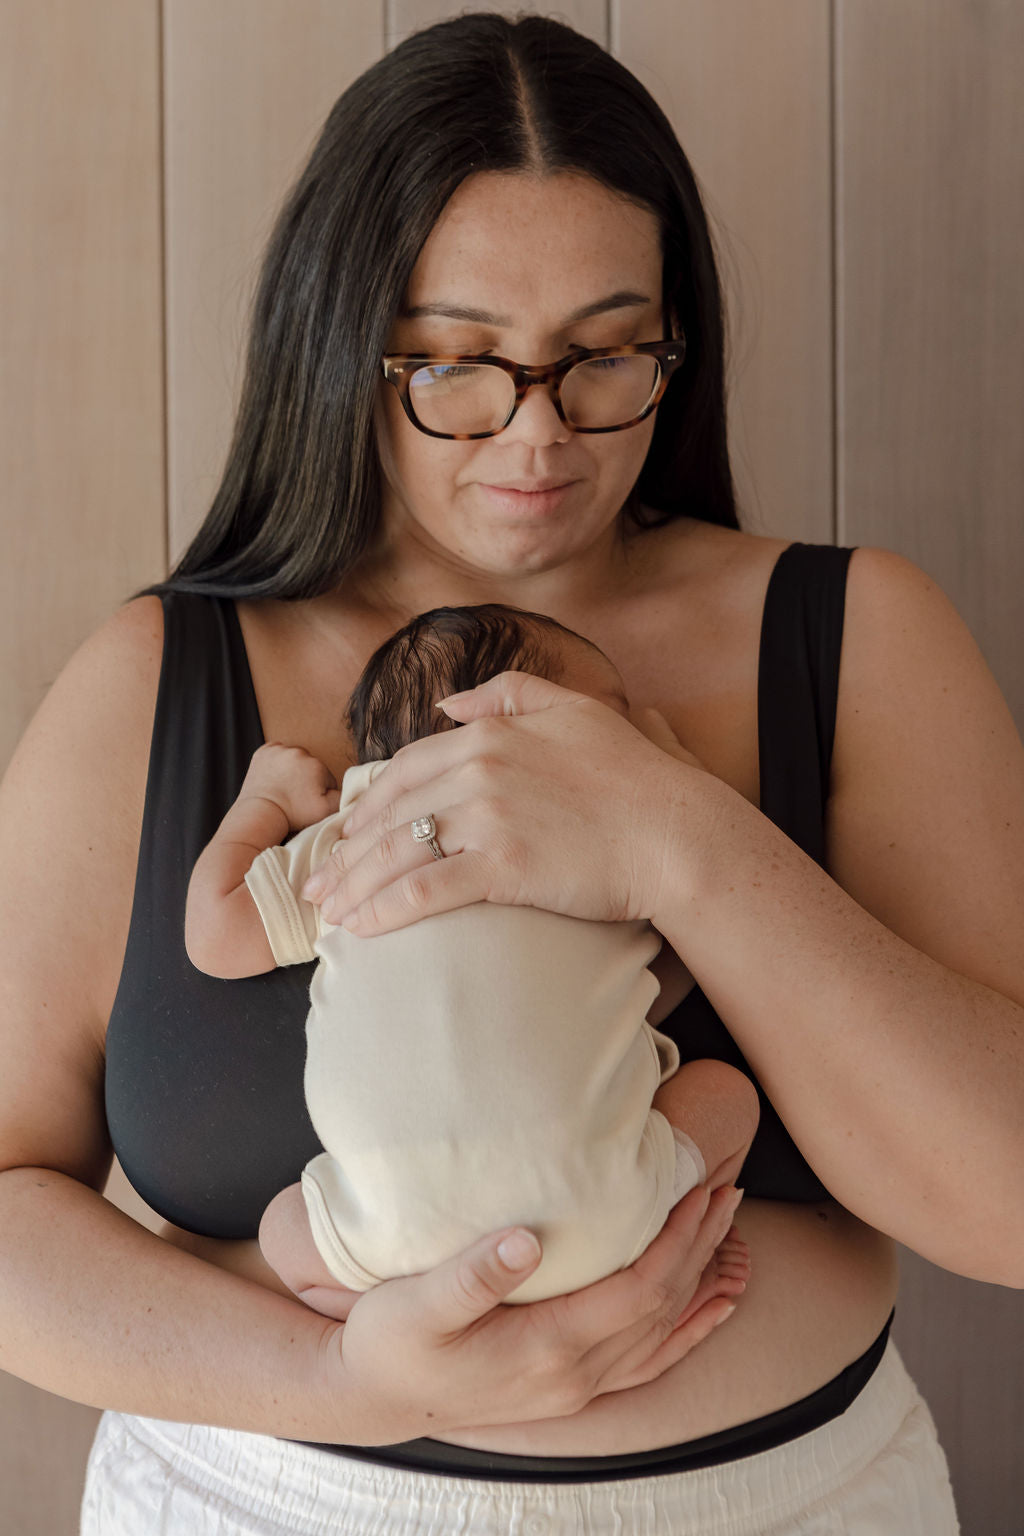 A woman holding a baby while wearing glasses.